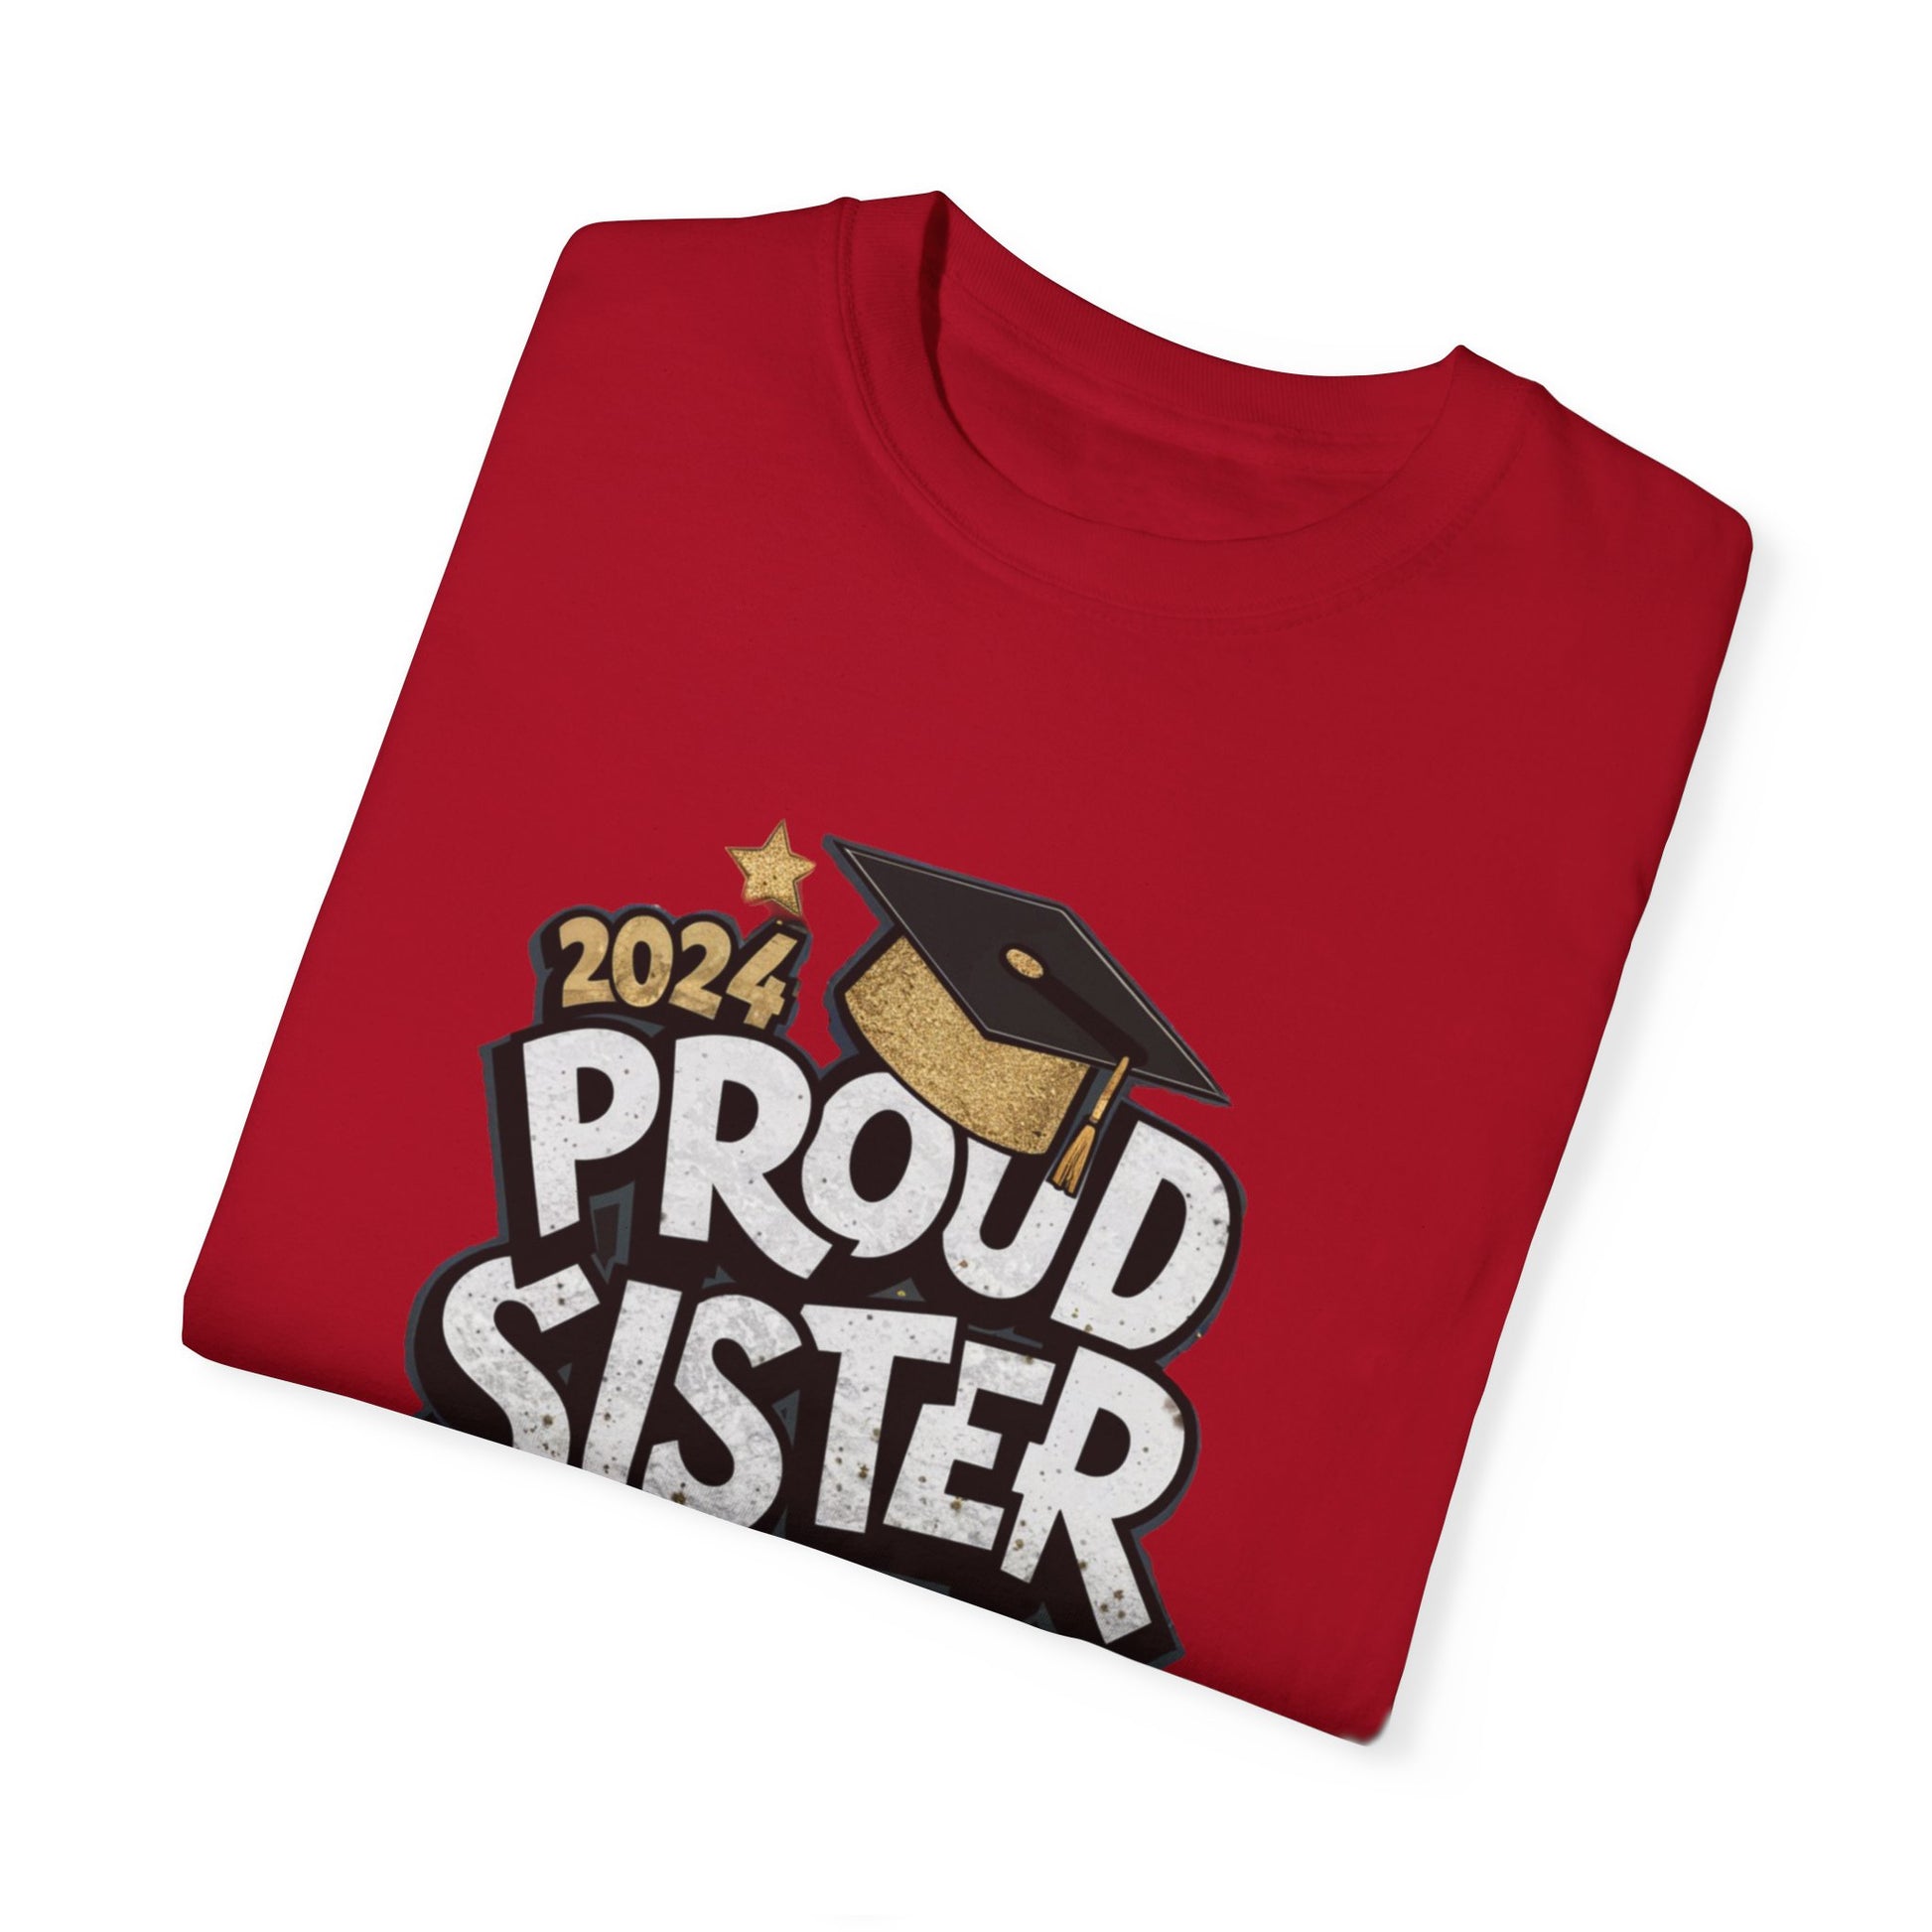 Proud Sister of a 2024 Graduate Unisex Garment-dyed T-shirt Cotton Funny Humorous Graphic Soft Premium Unisex Men Women Red T-shirt Birthday Gift-20